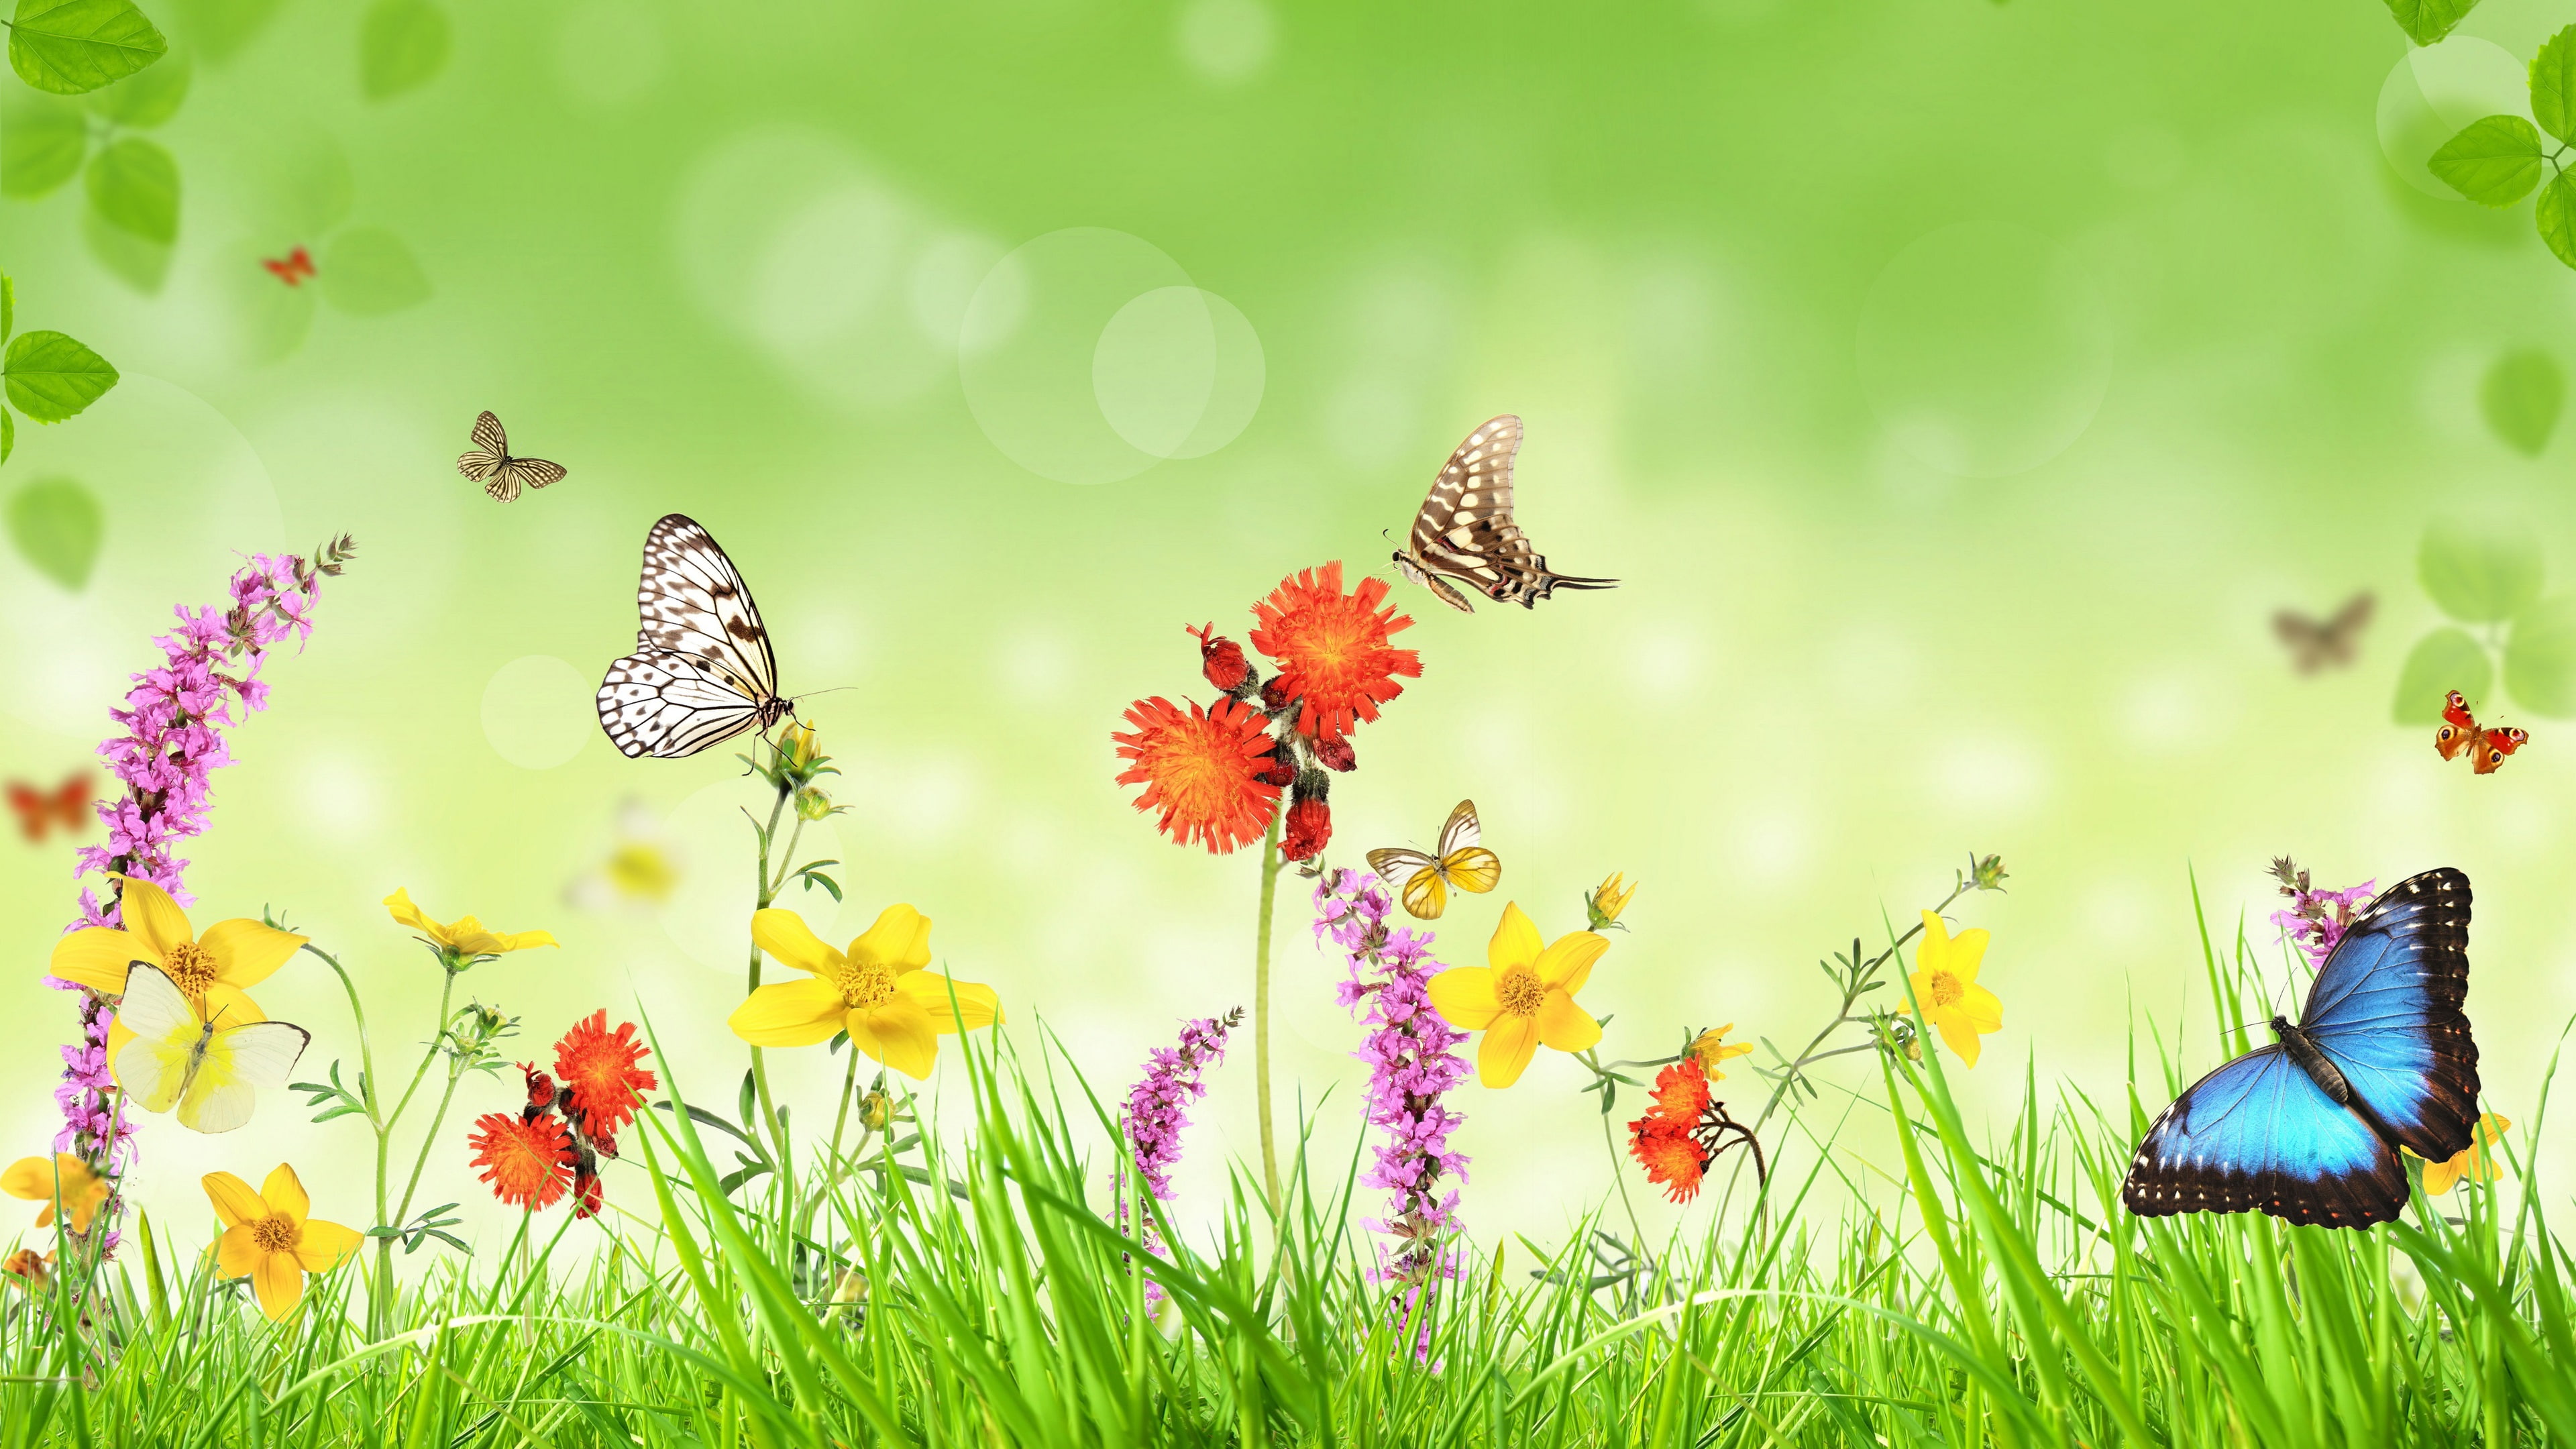 Spring, flowers, grass, butterfly, green background, creative design, cabbage white butterfly, morpho butterfly and tiger swallowtail butterfly print